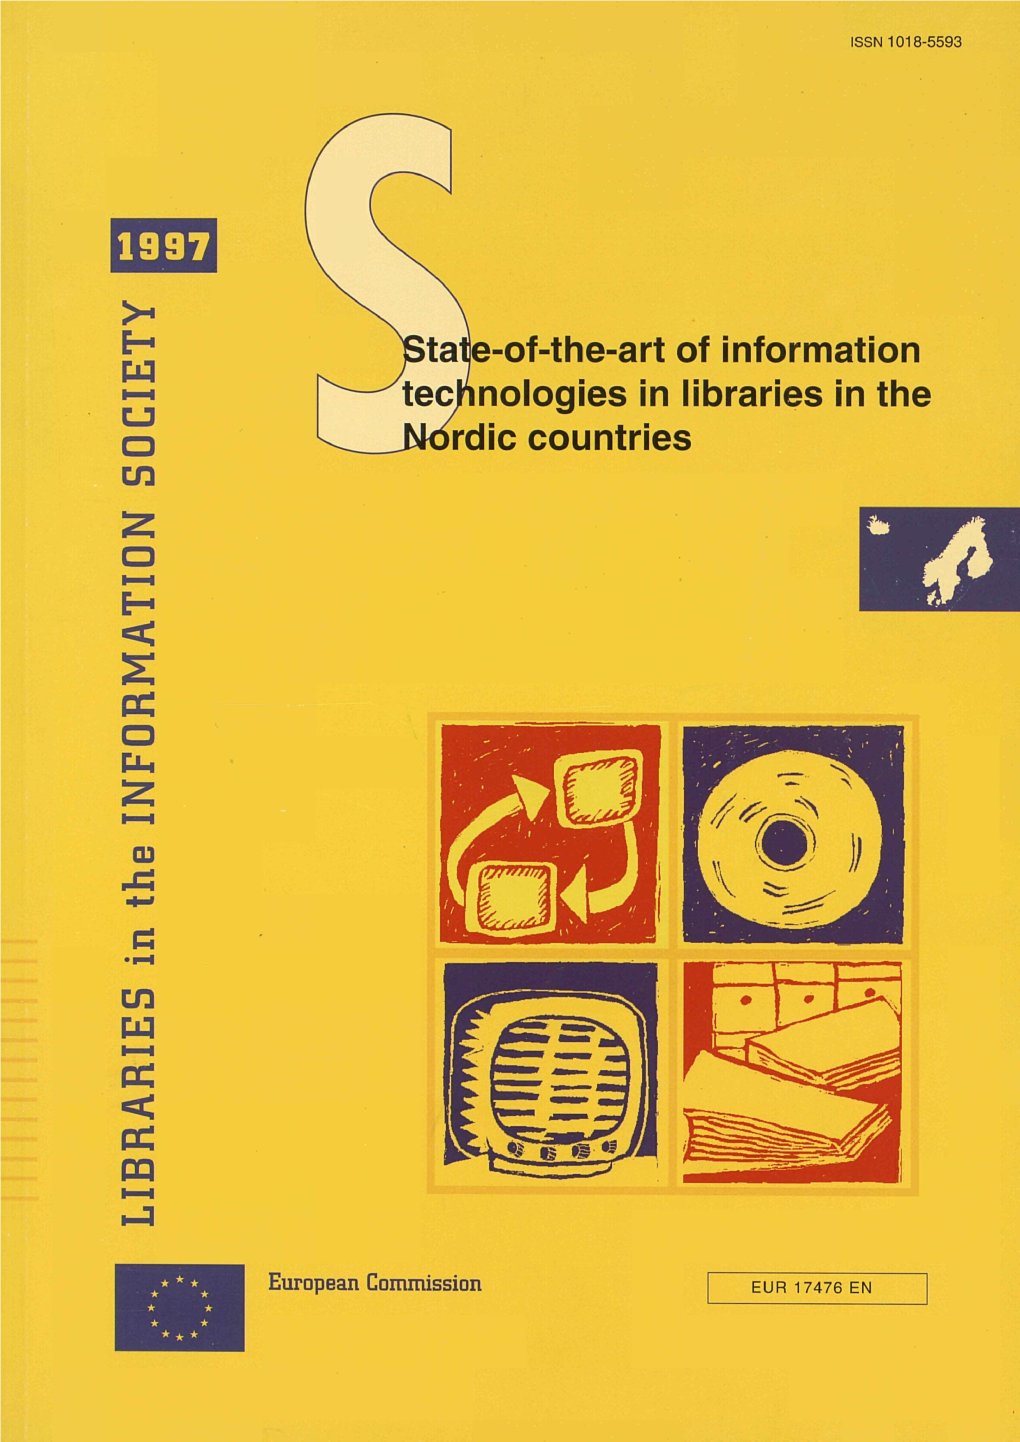 The Public Libraries Are Well on Their Way to Becoming Integrated Into the World of Information Technology